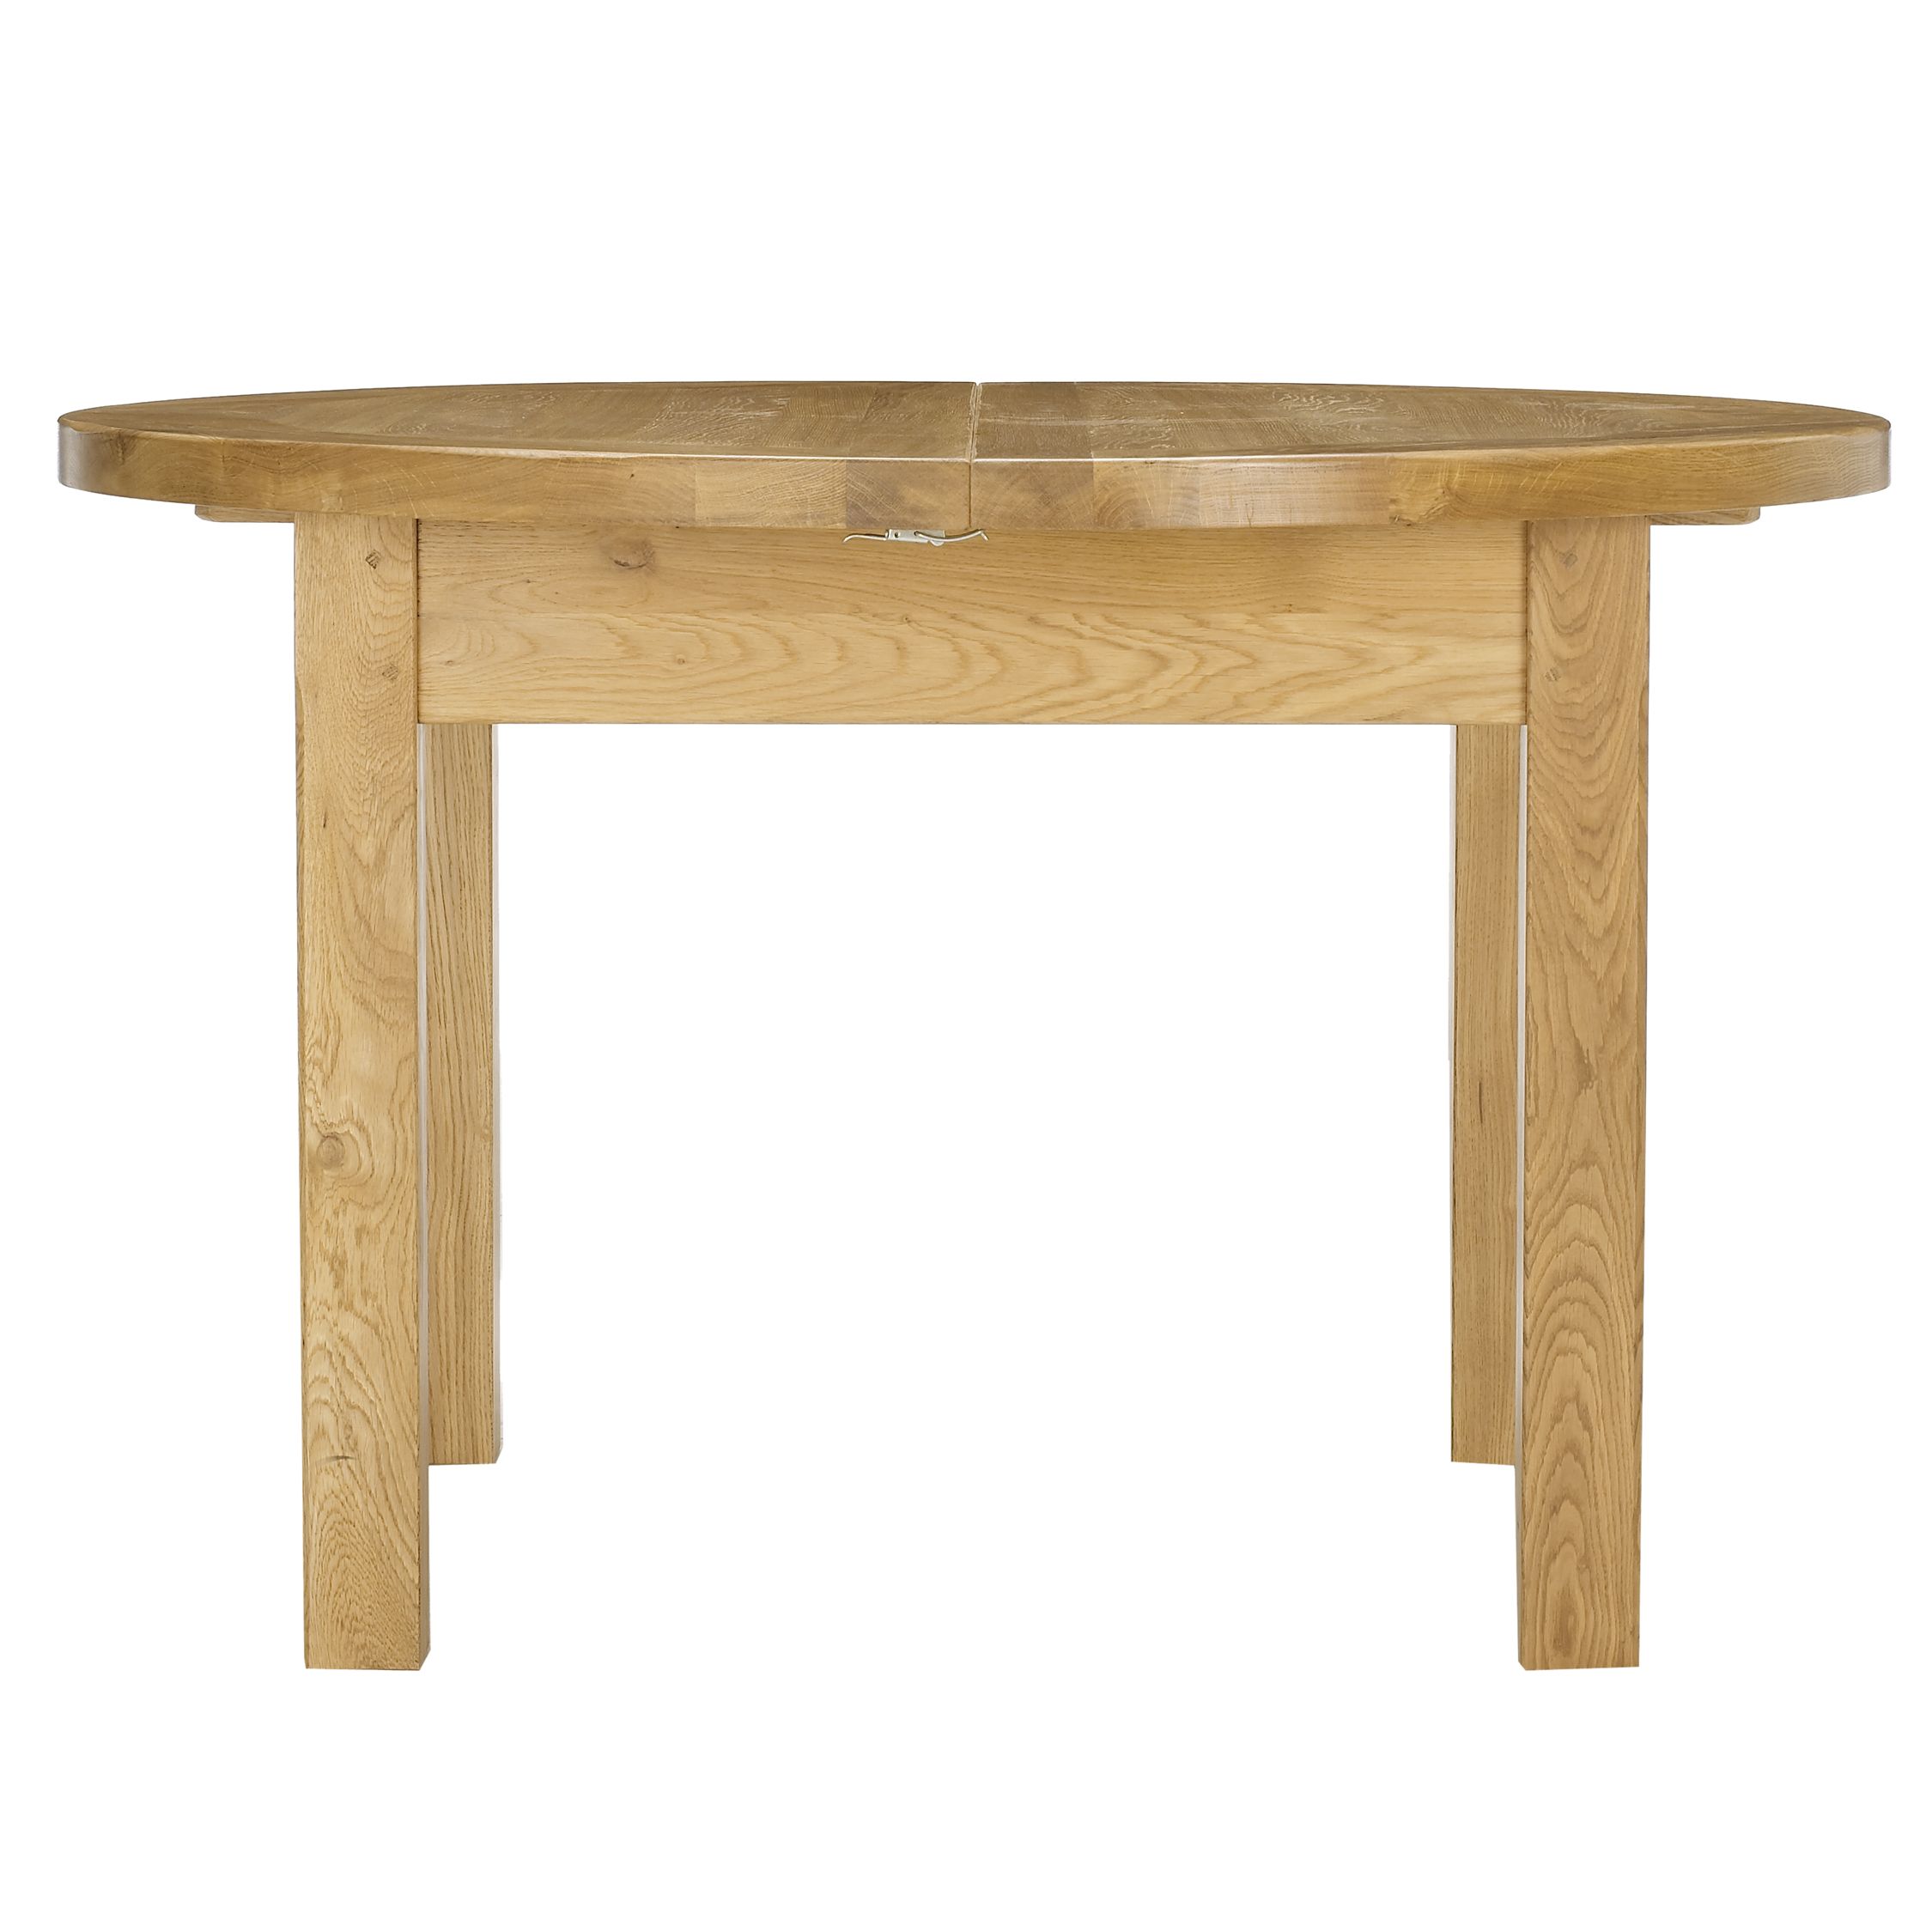 Ardennes Round Extending Dining Table, Sarlat at John Lewis